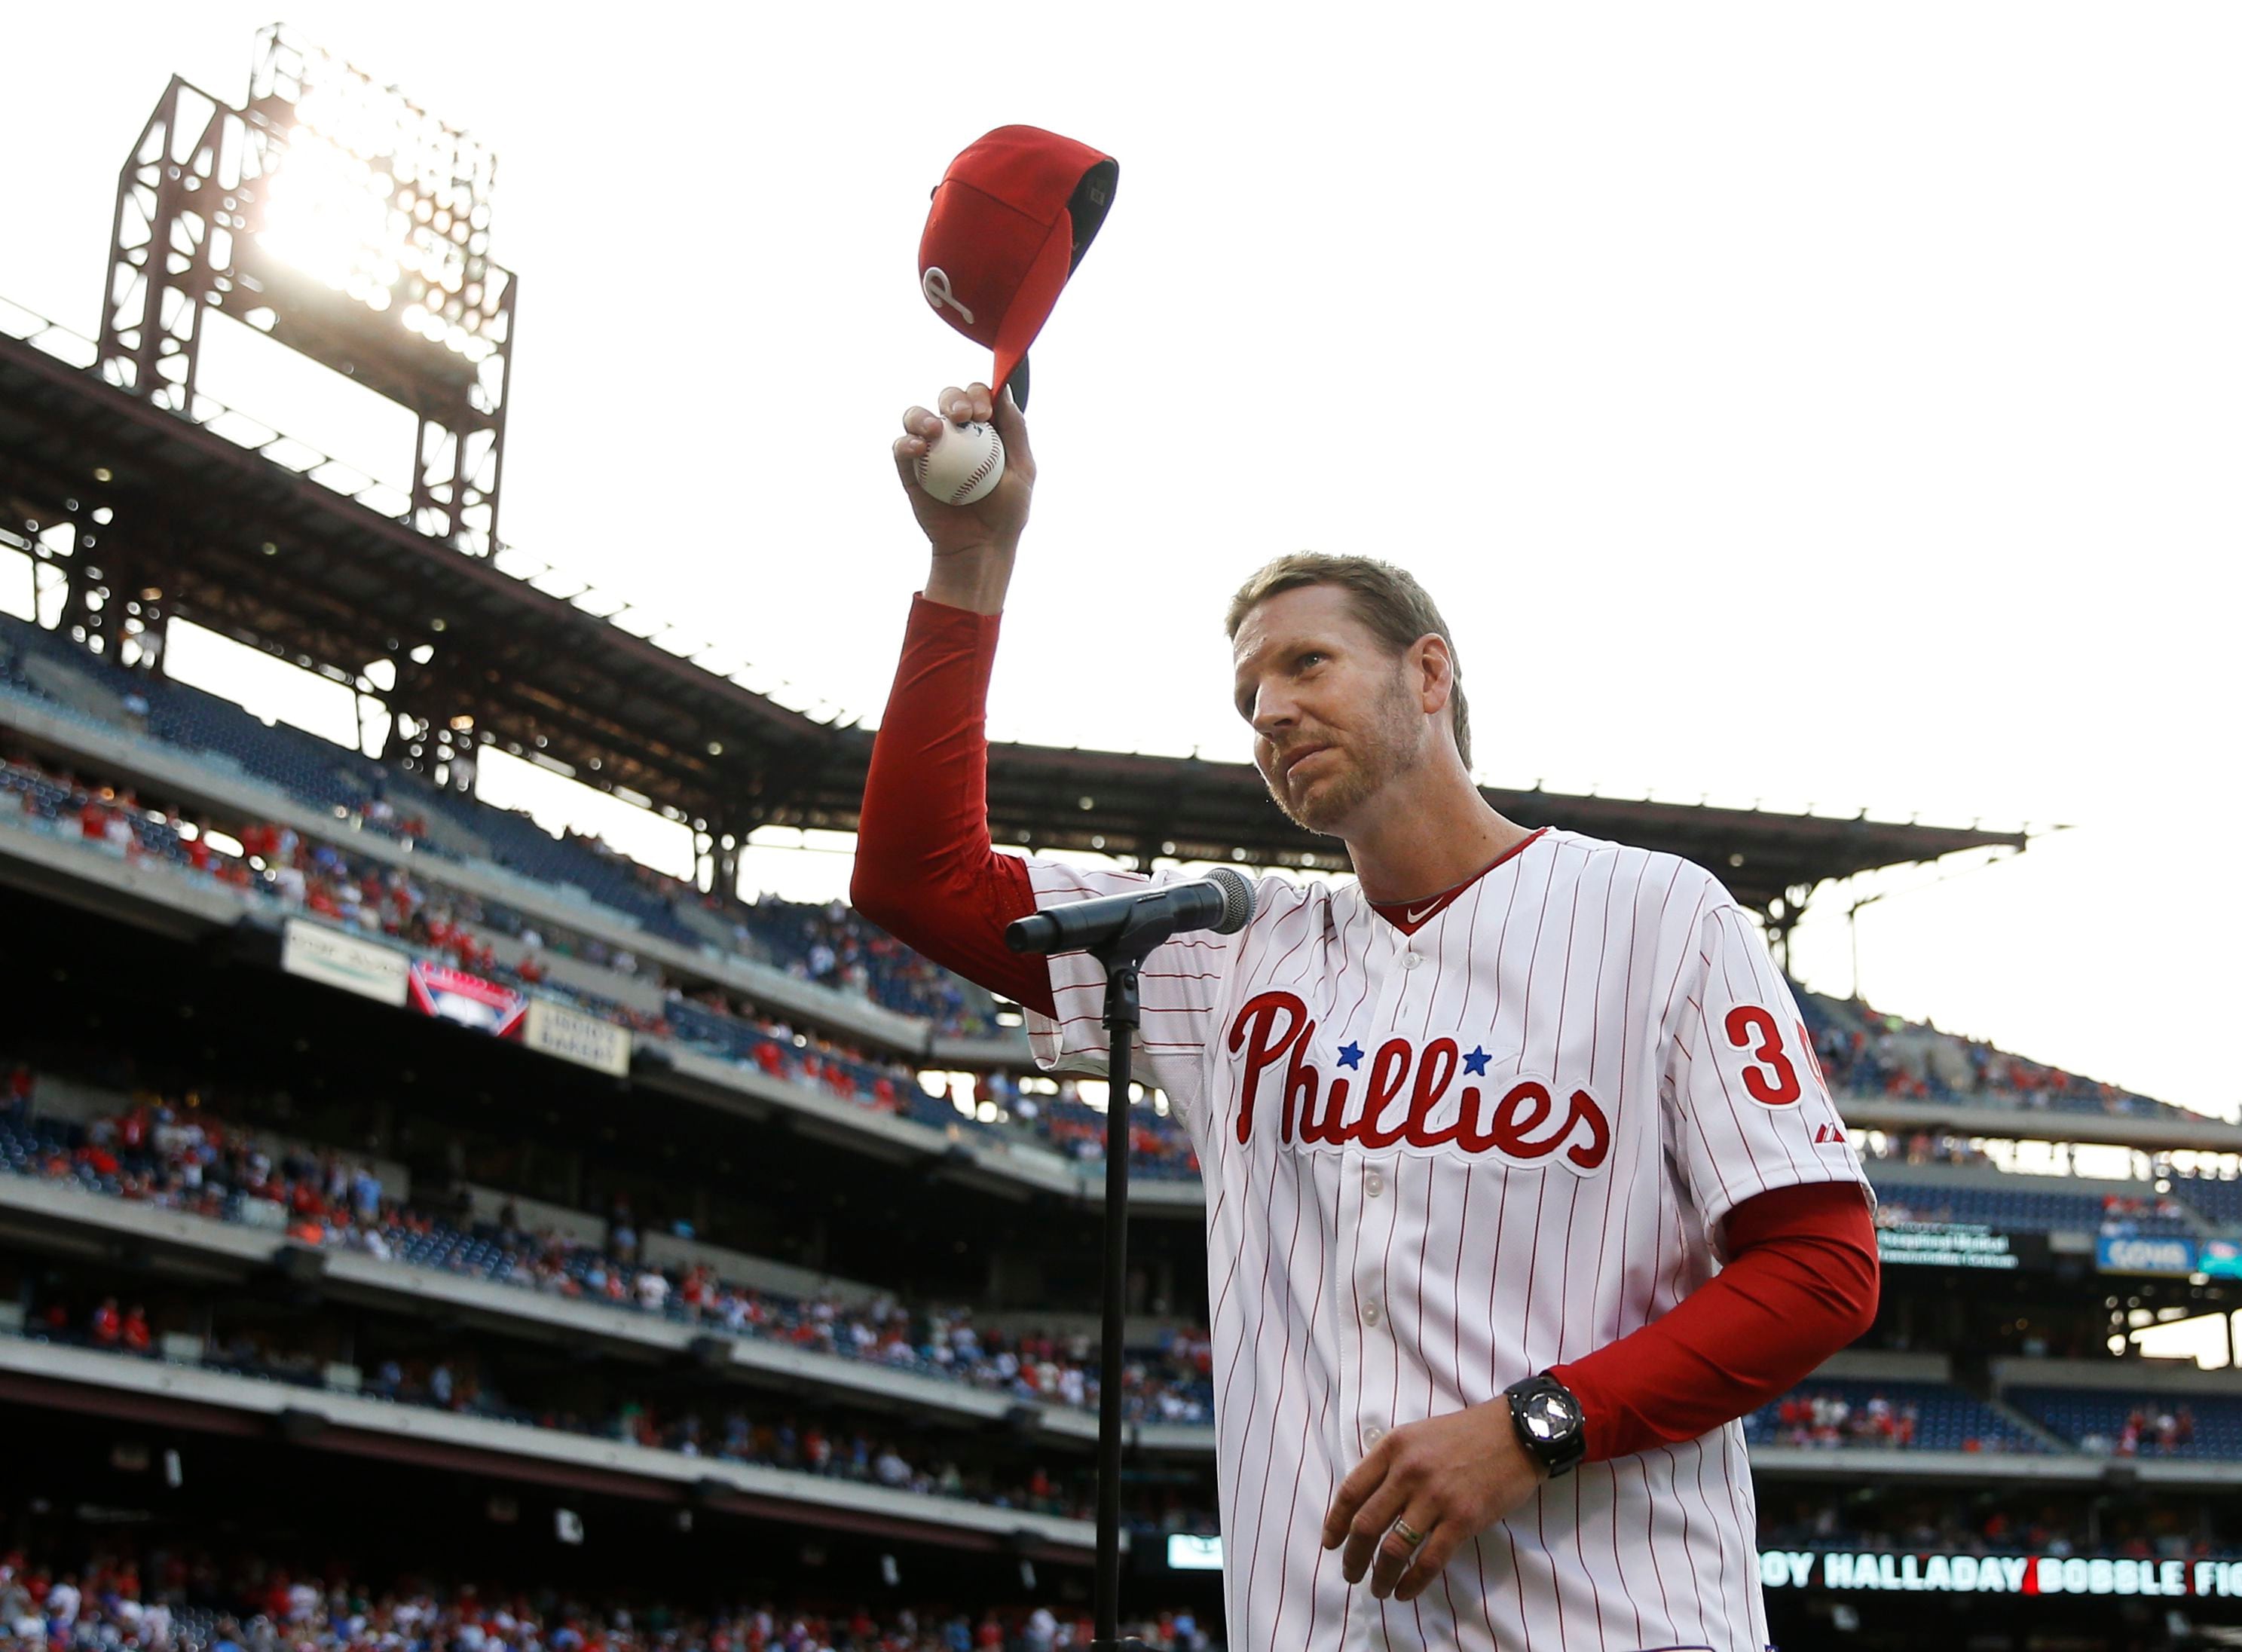 On deck for Halladay: 20 wins and a place in Phillies history